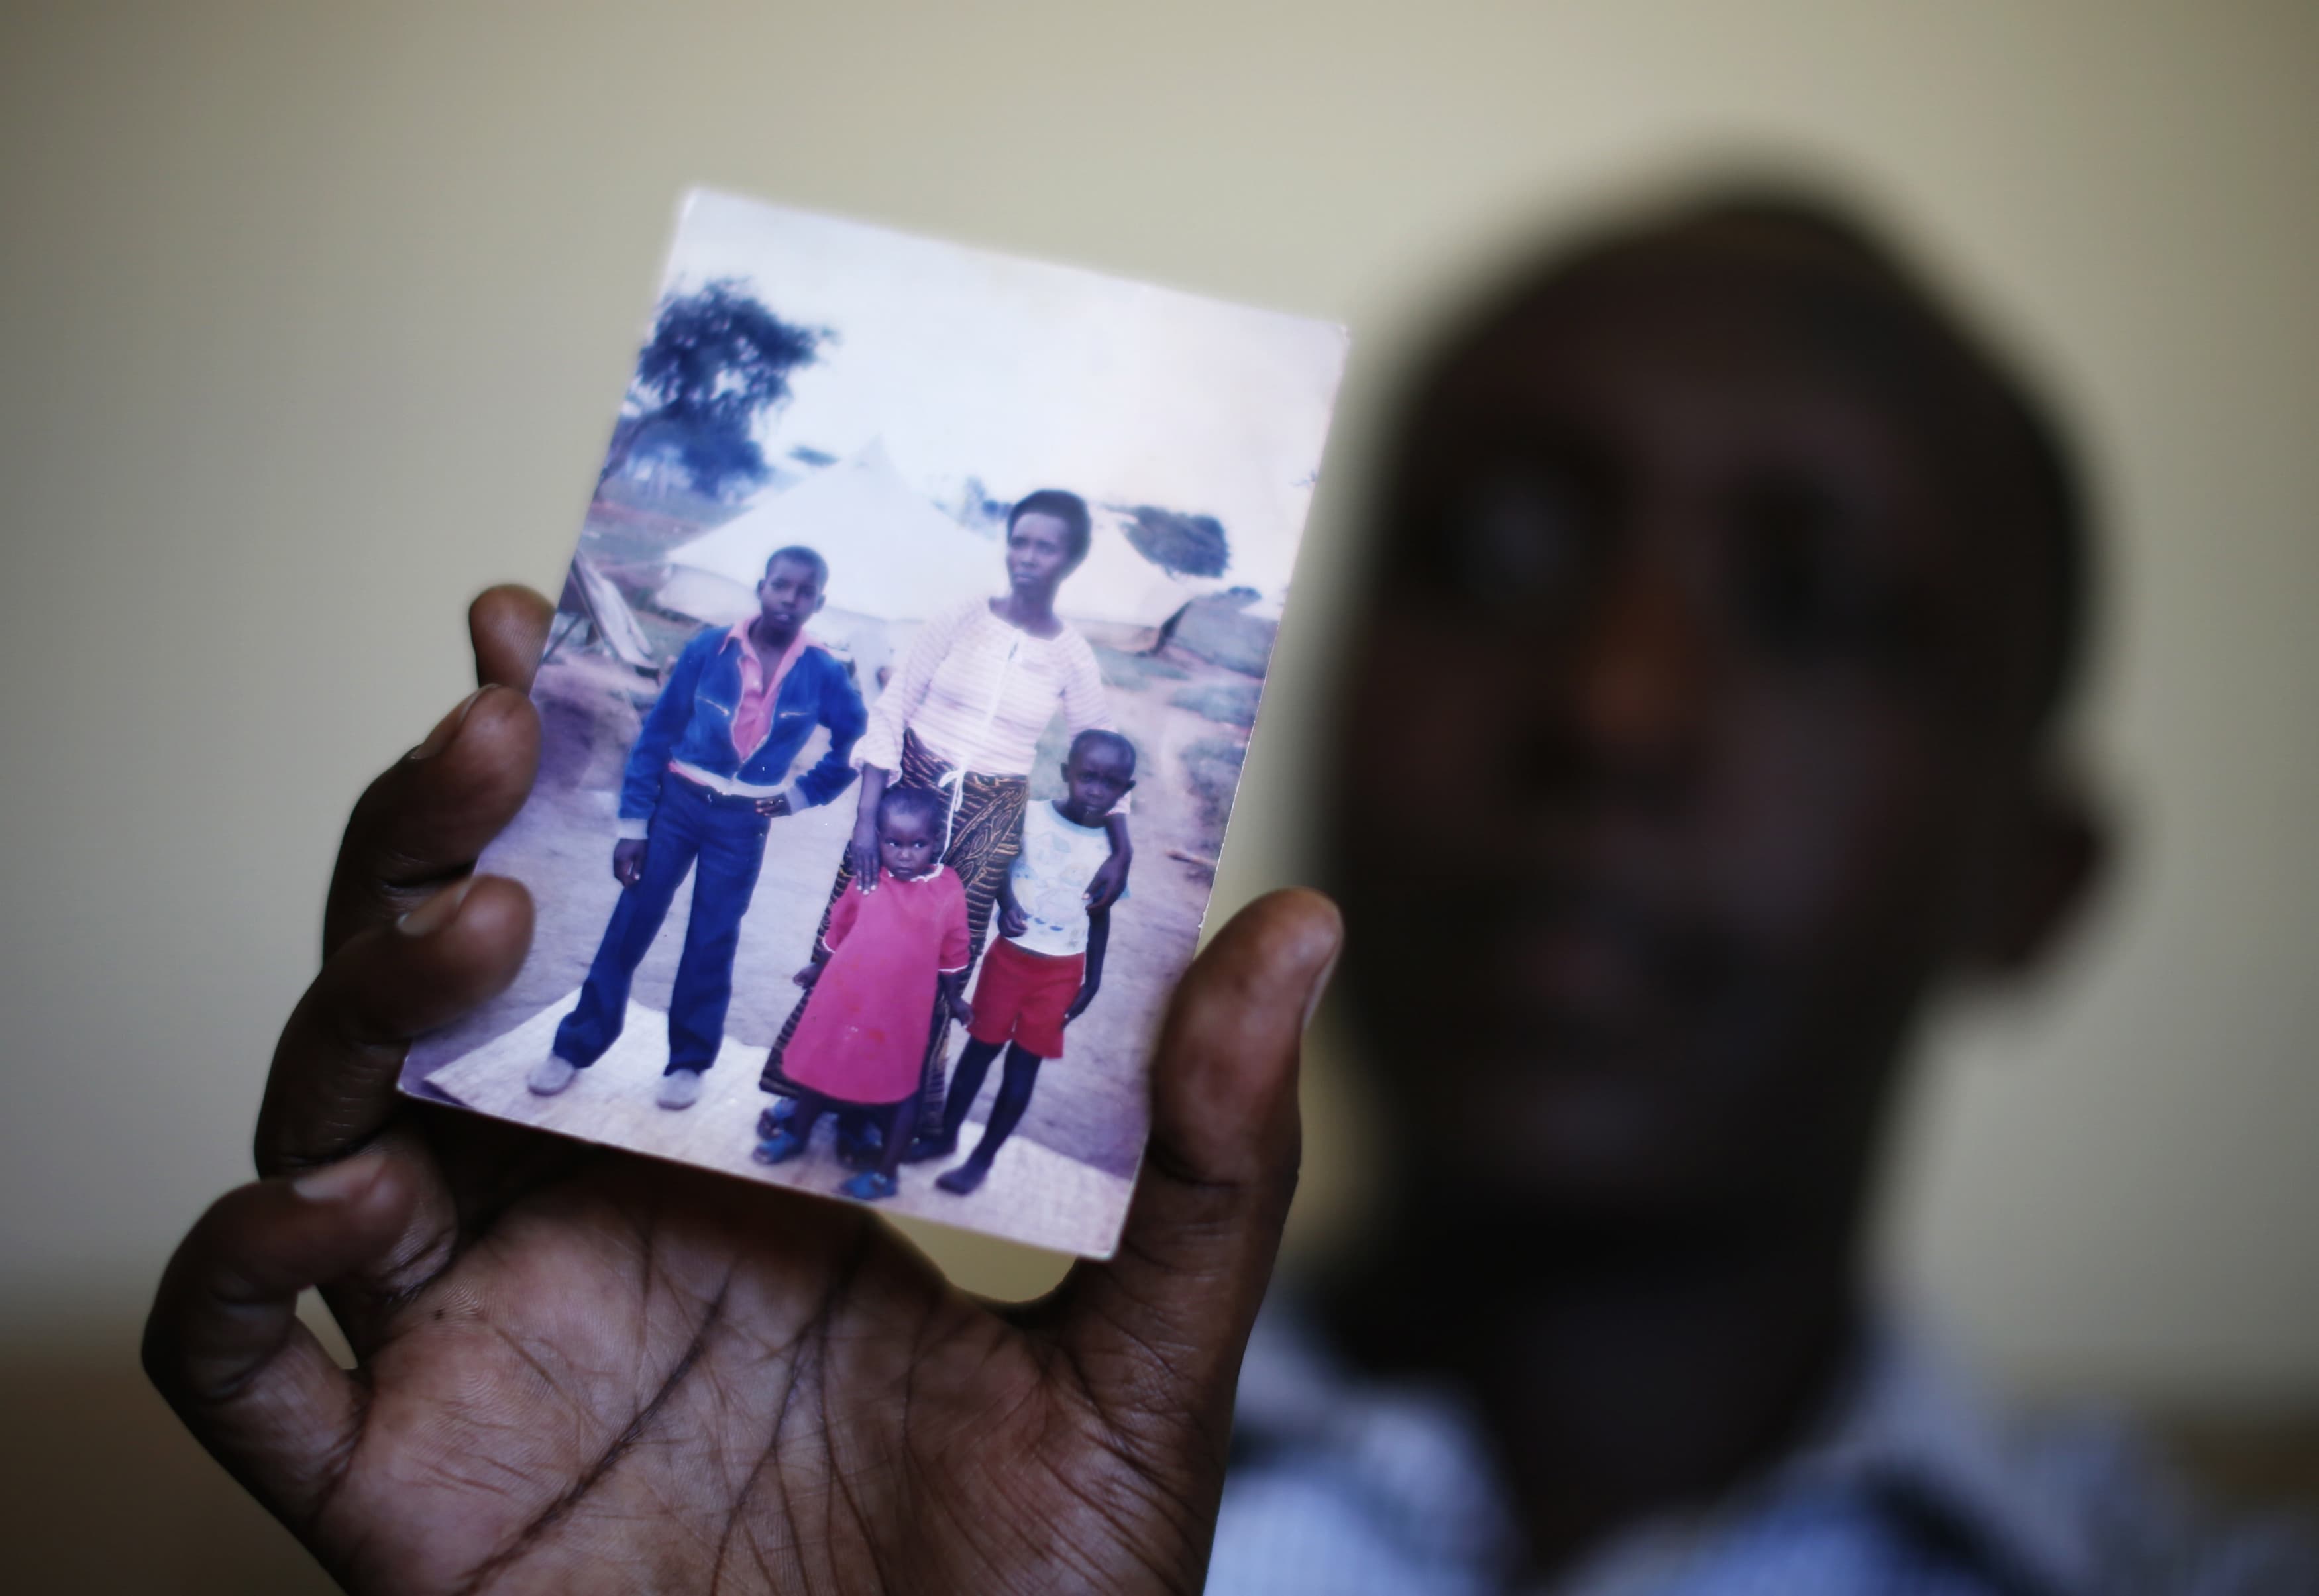 Patrick Manyika holds up a photo of himself and his family. Manyika was born in a Ugandan refugee camp after his Tutsi family fled Rwanda., REUTERS/Lucy Nicholson